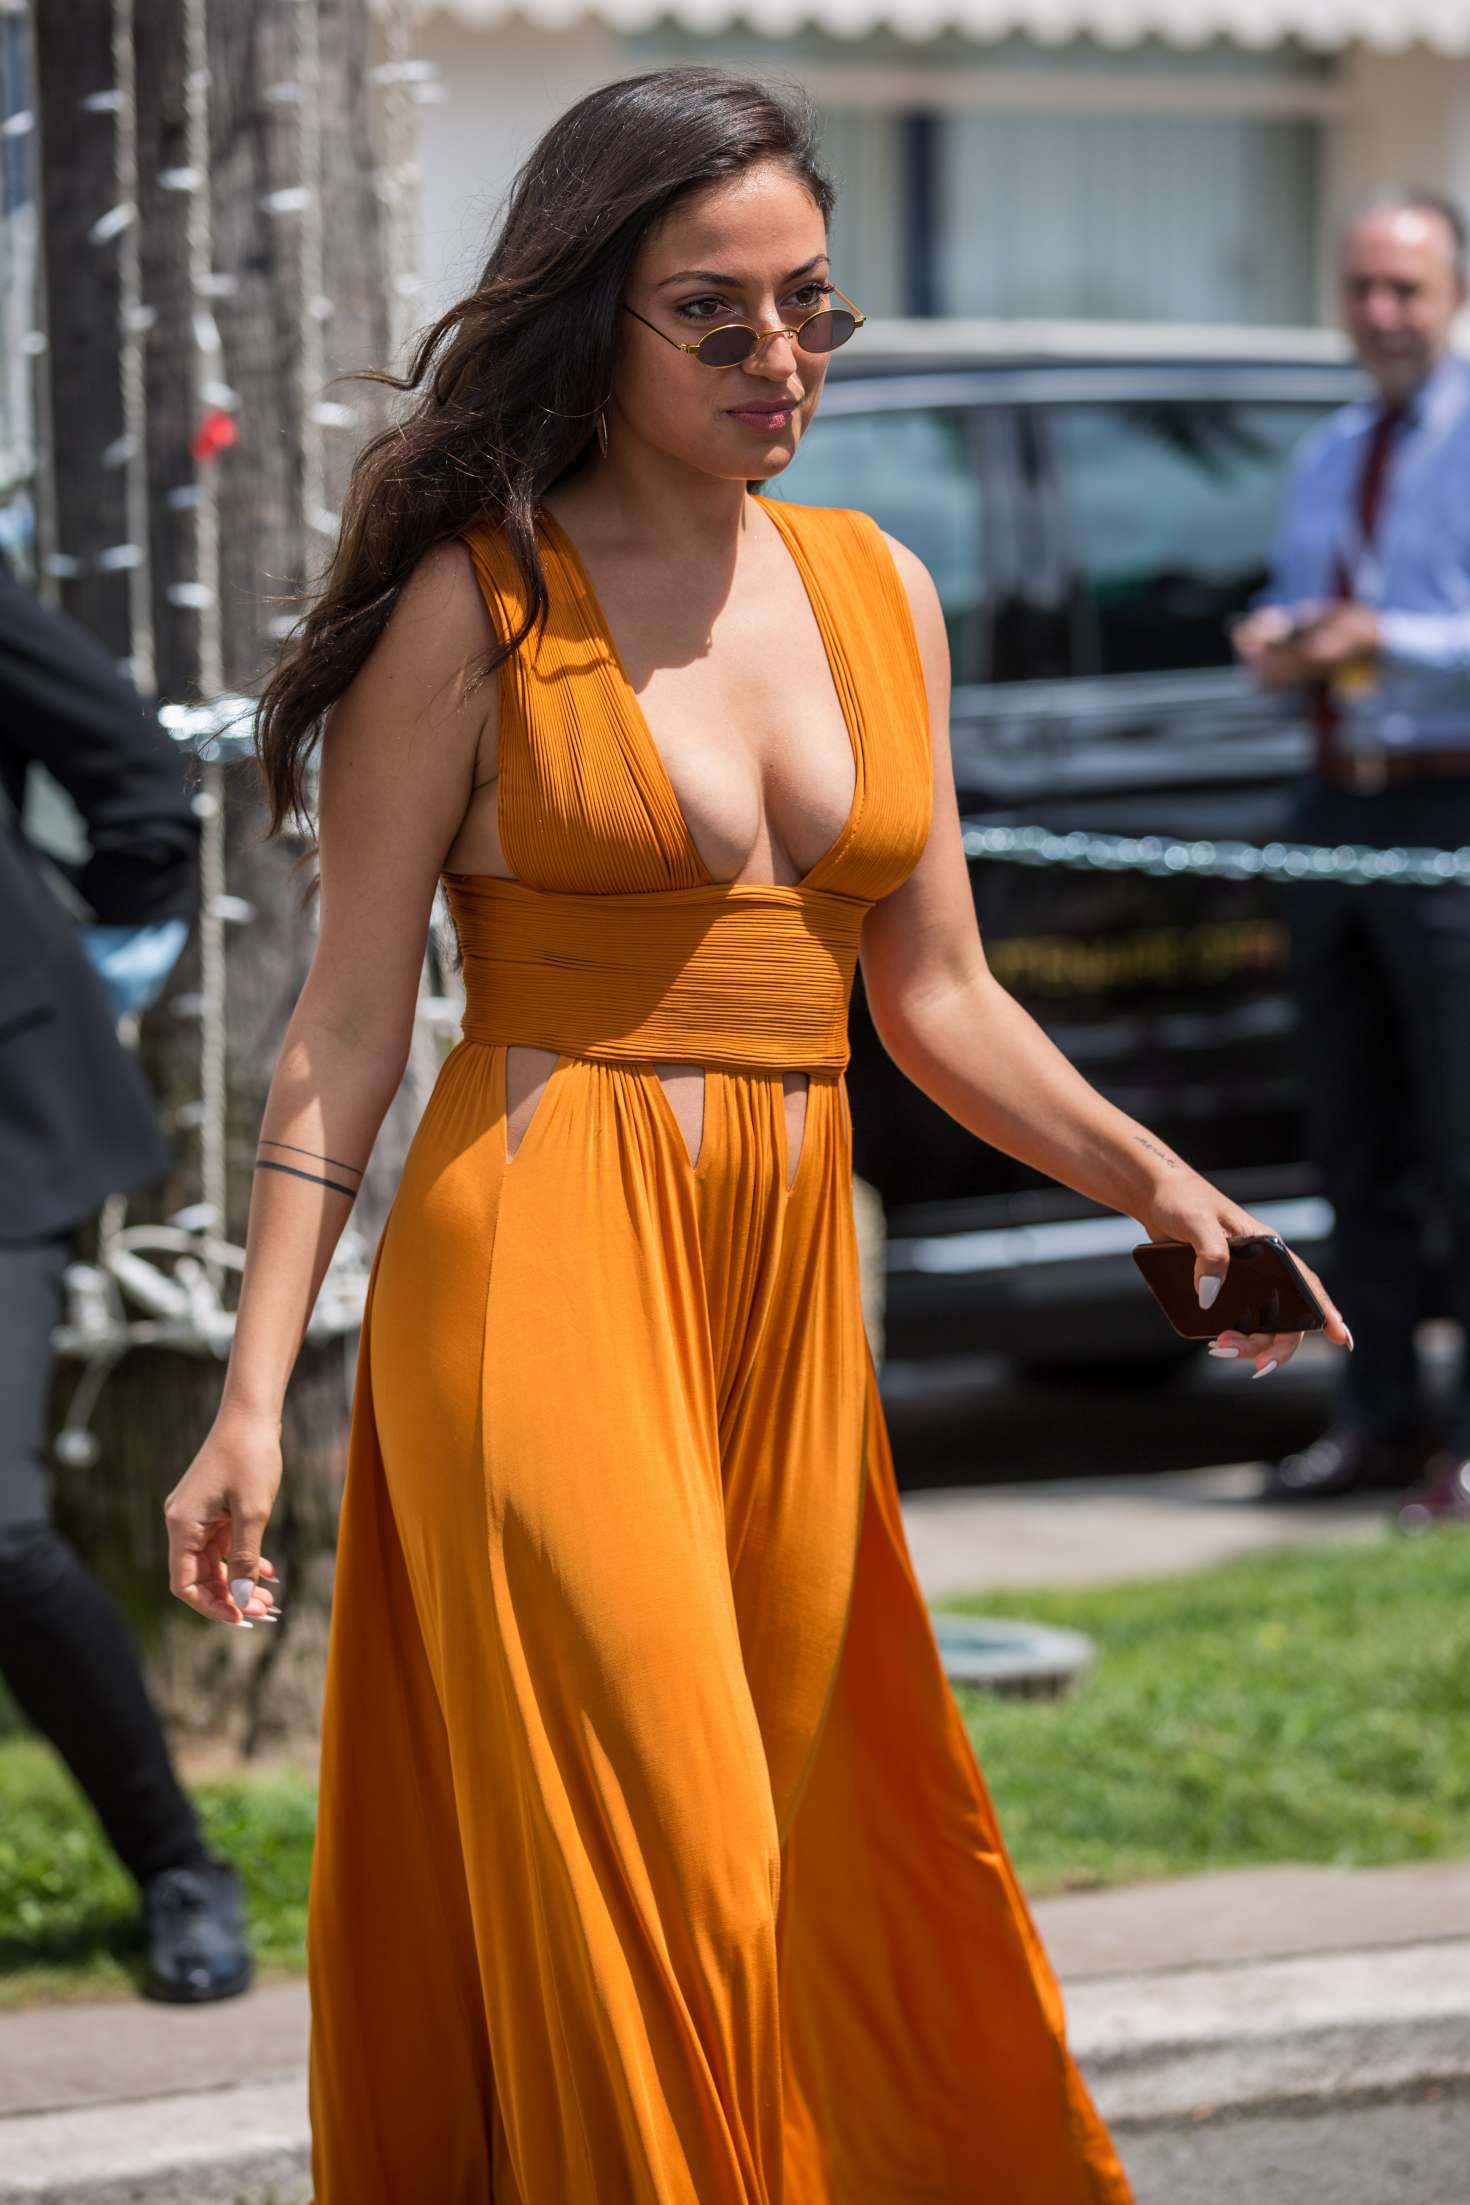 Inanna Sarkis in Long Dress at Croisette in Cannes